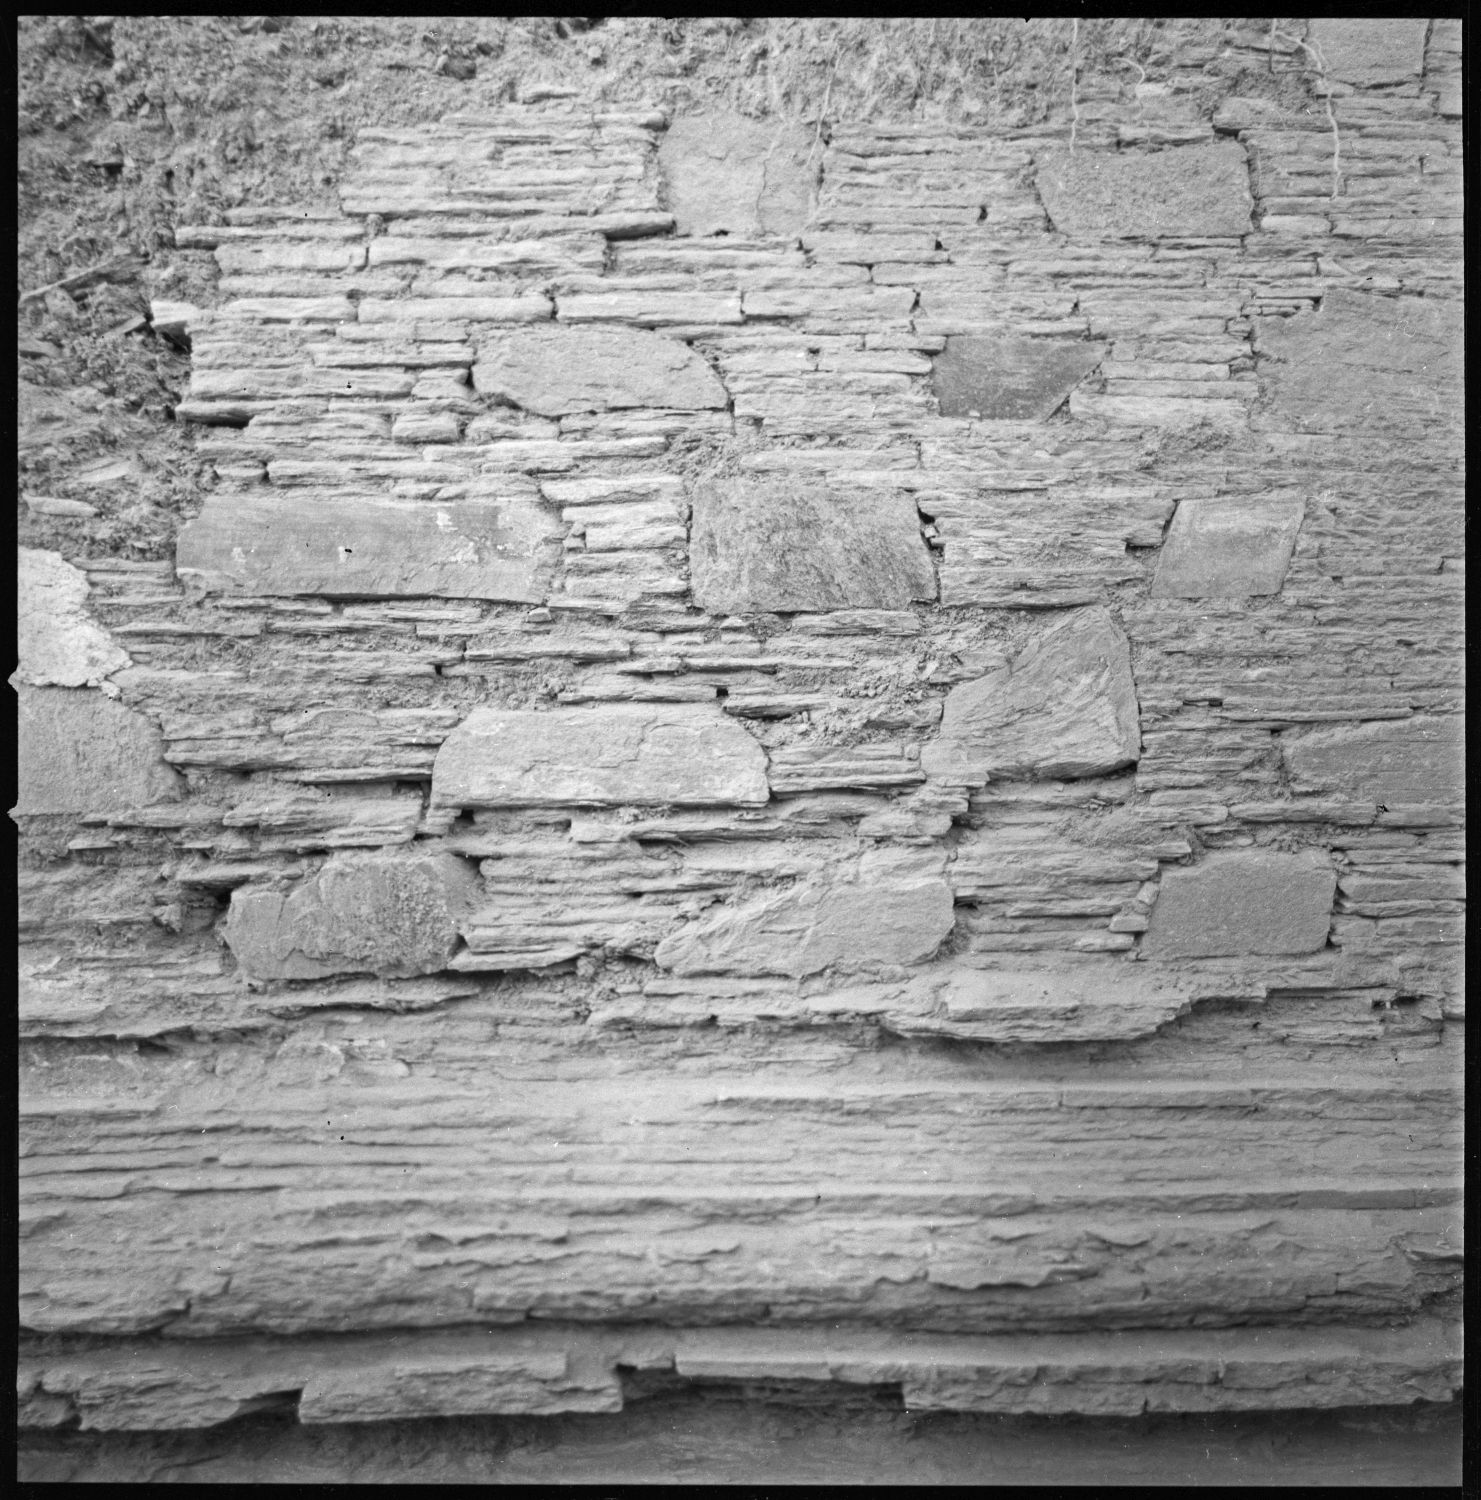 Stupa: detail of wall showing schist slabs.